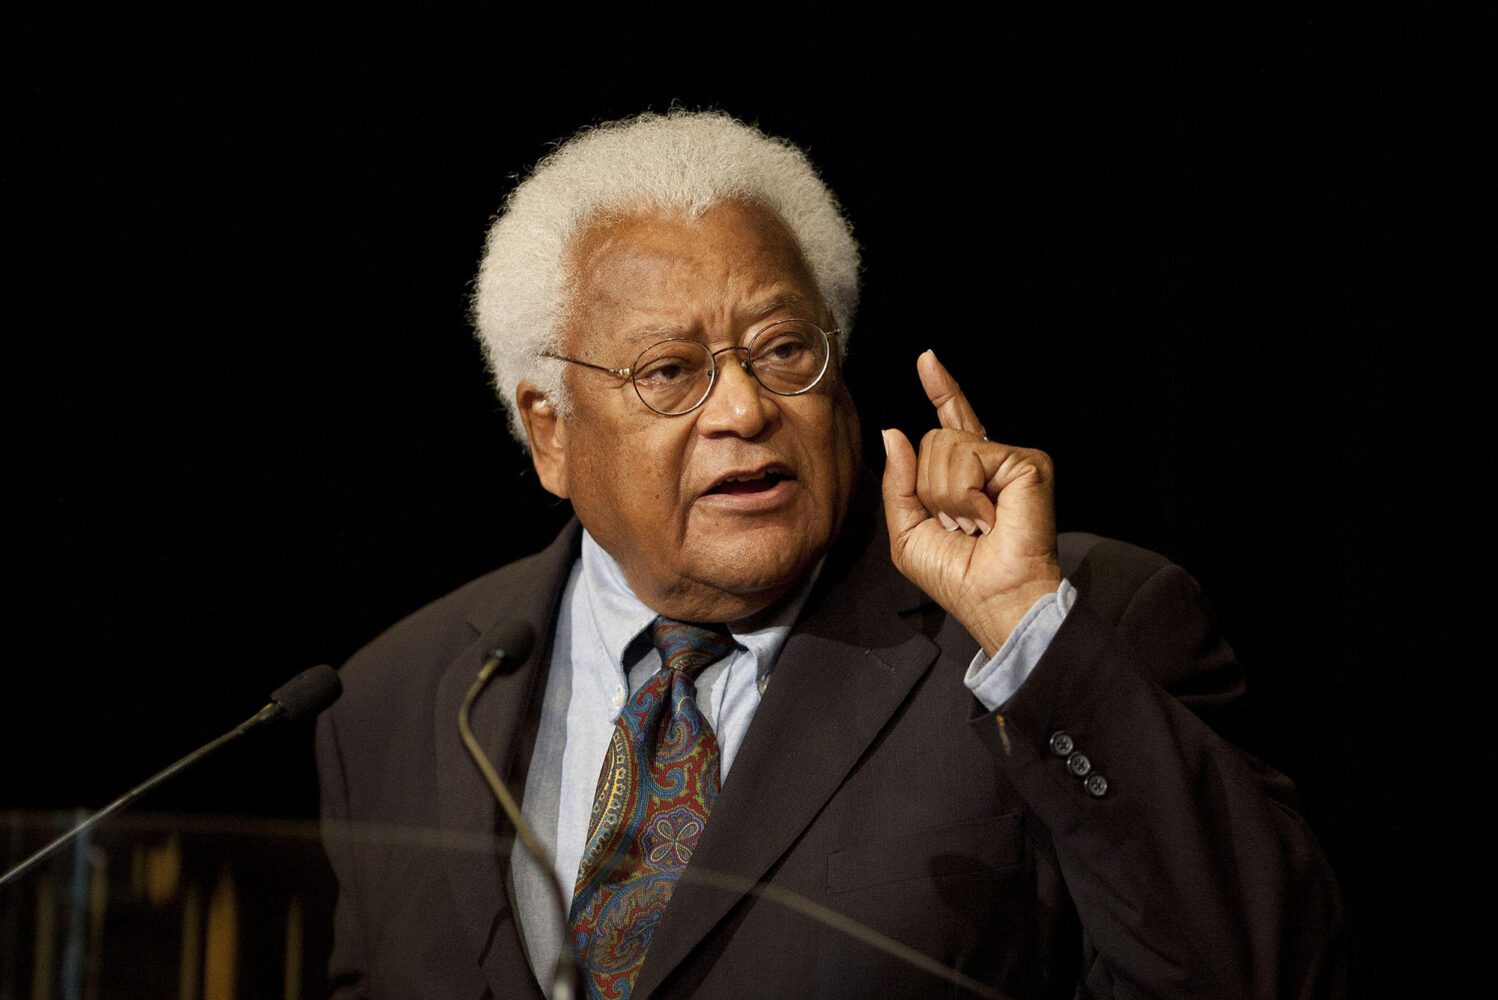 Photo: A picture of James Lawson, an American activist, doing a speech behind a podium while wearing a suit. His hair is white and he is wearing circular glasses